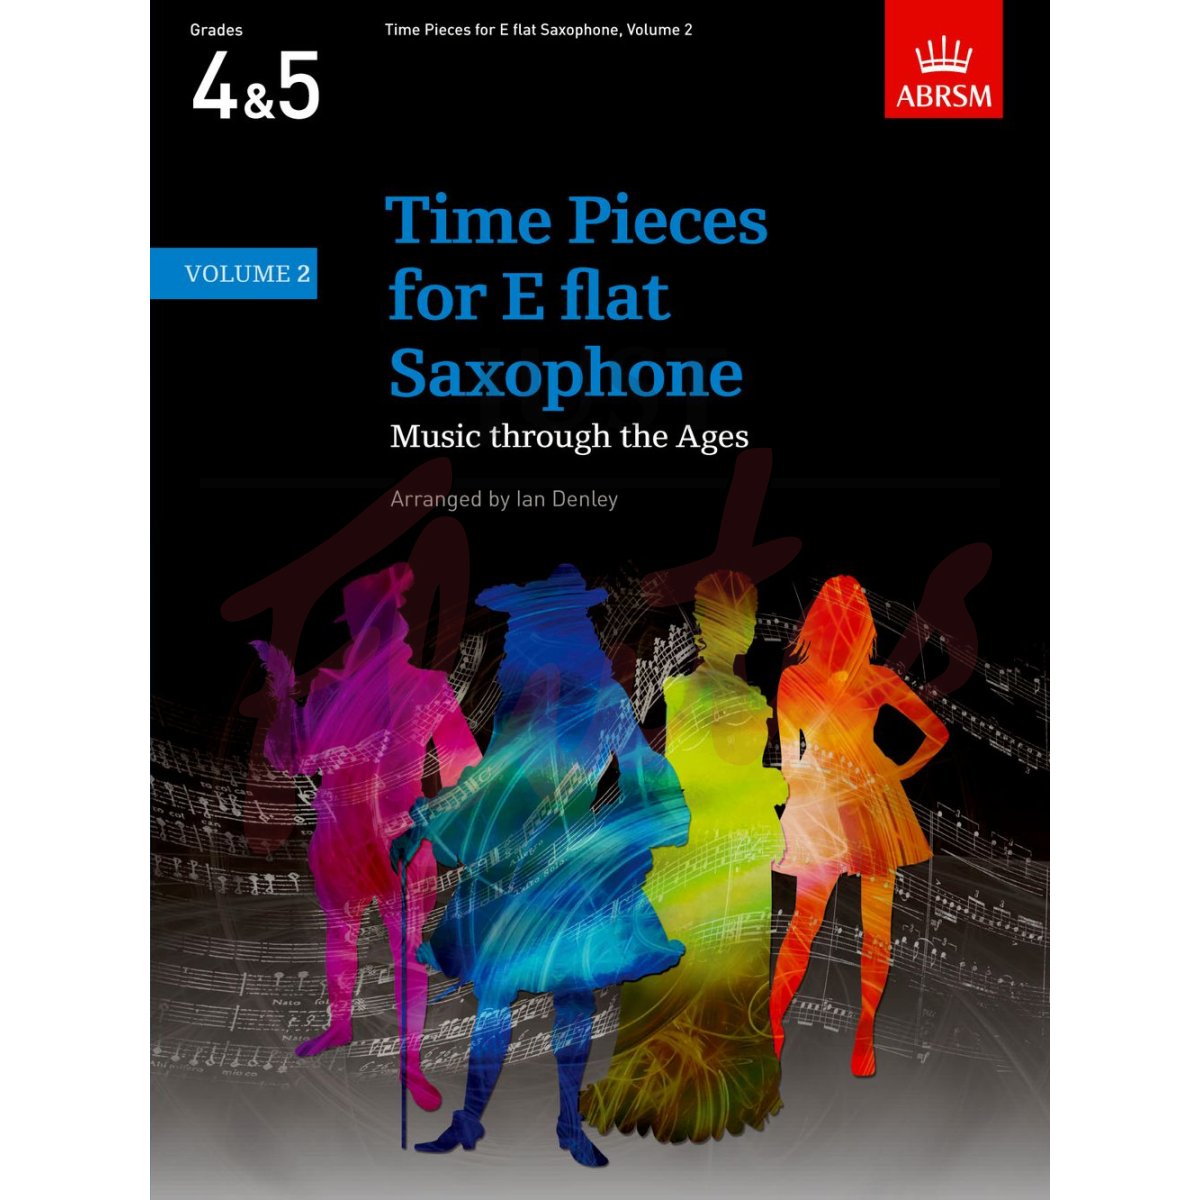 Time Pieces for E flat Saxophone